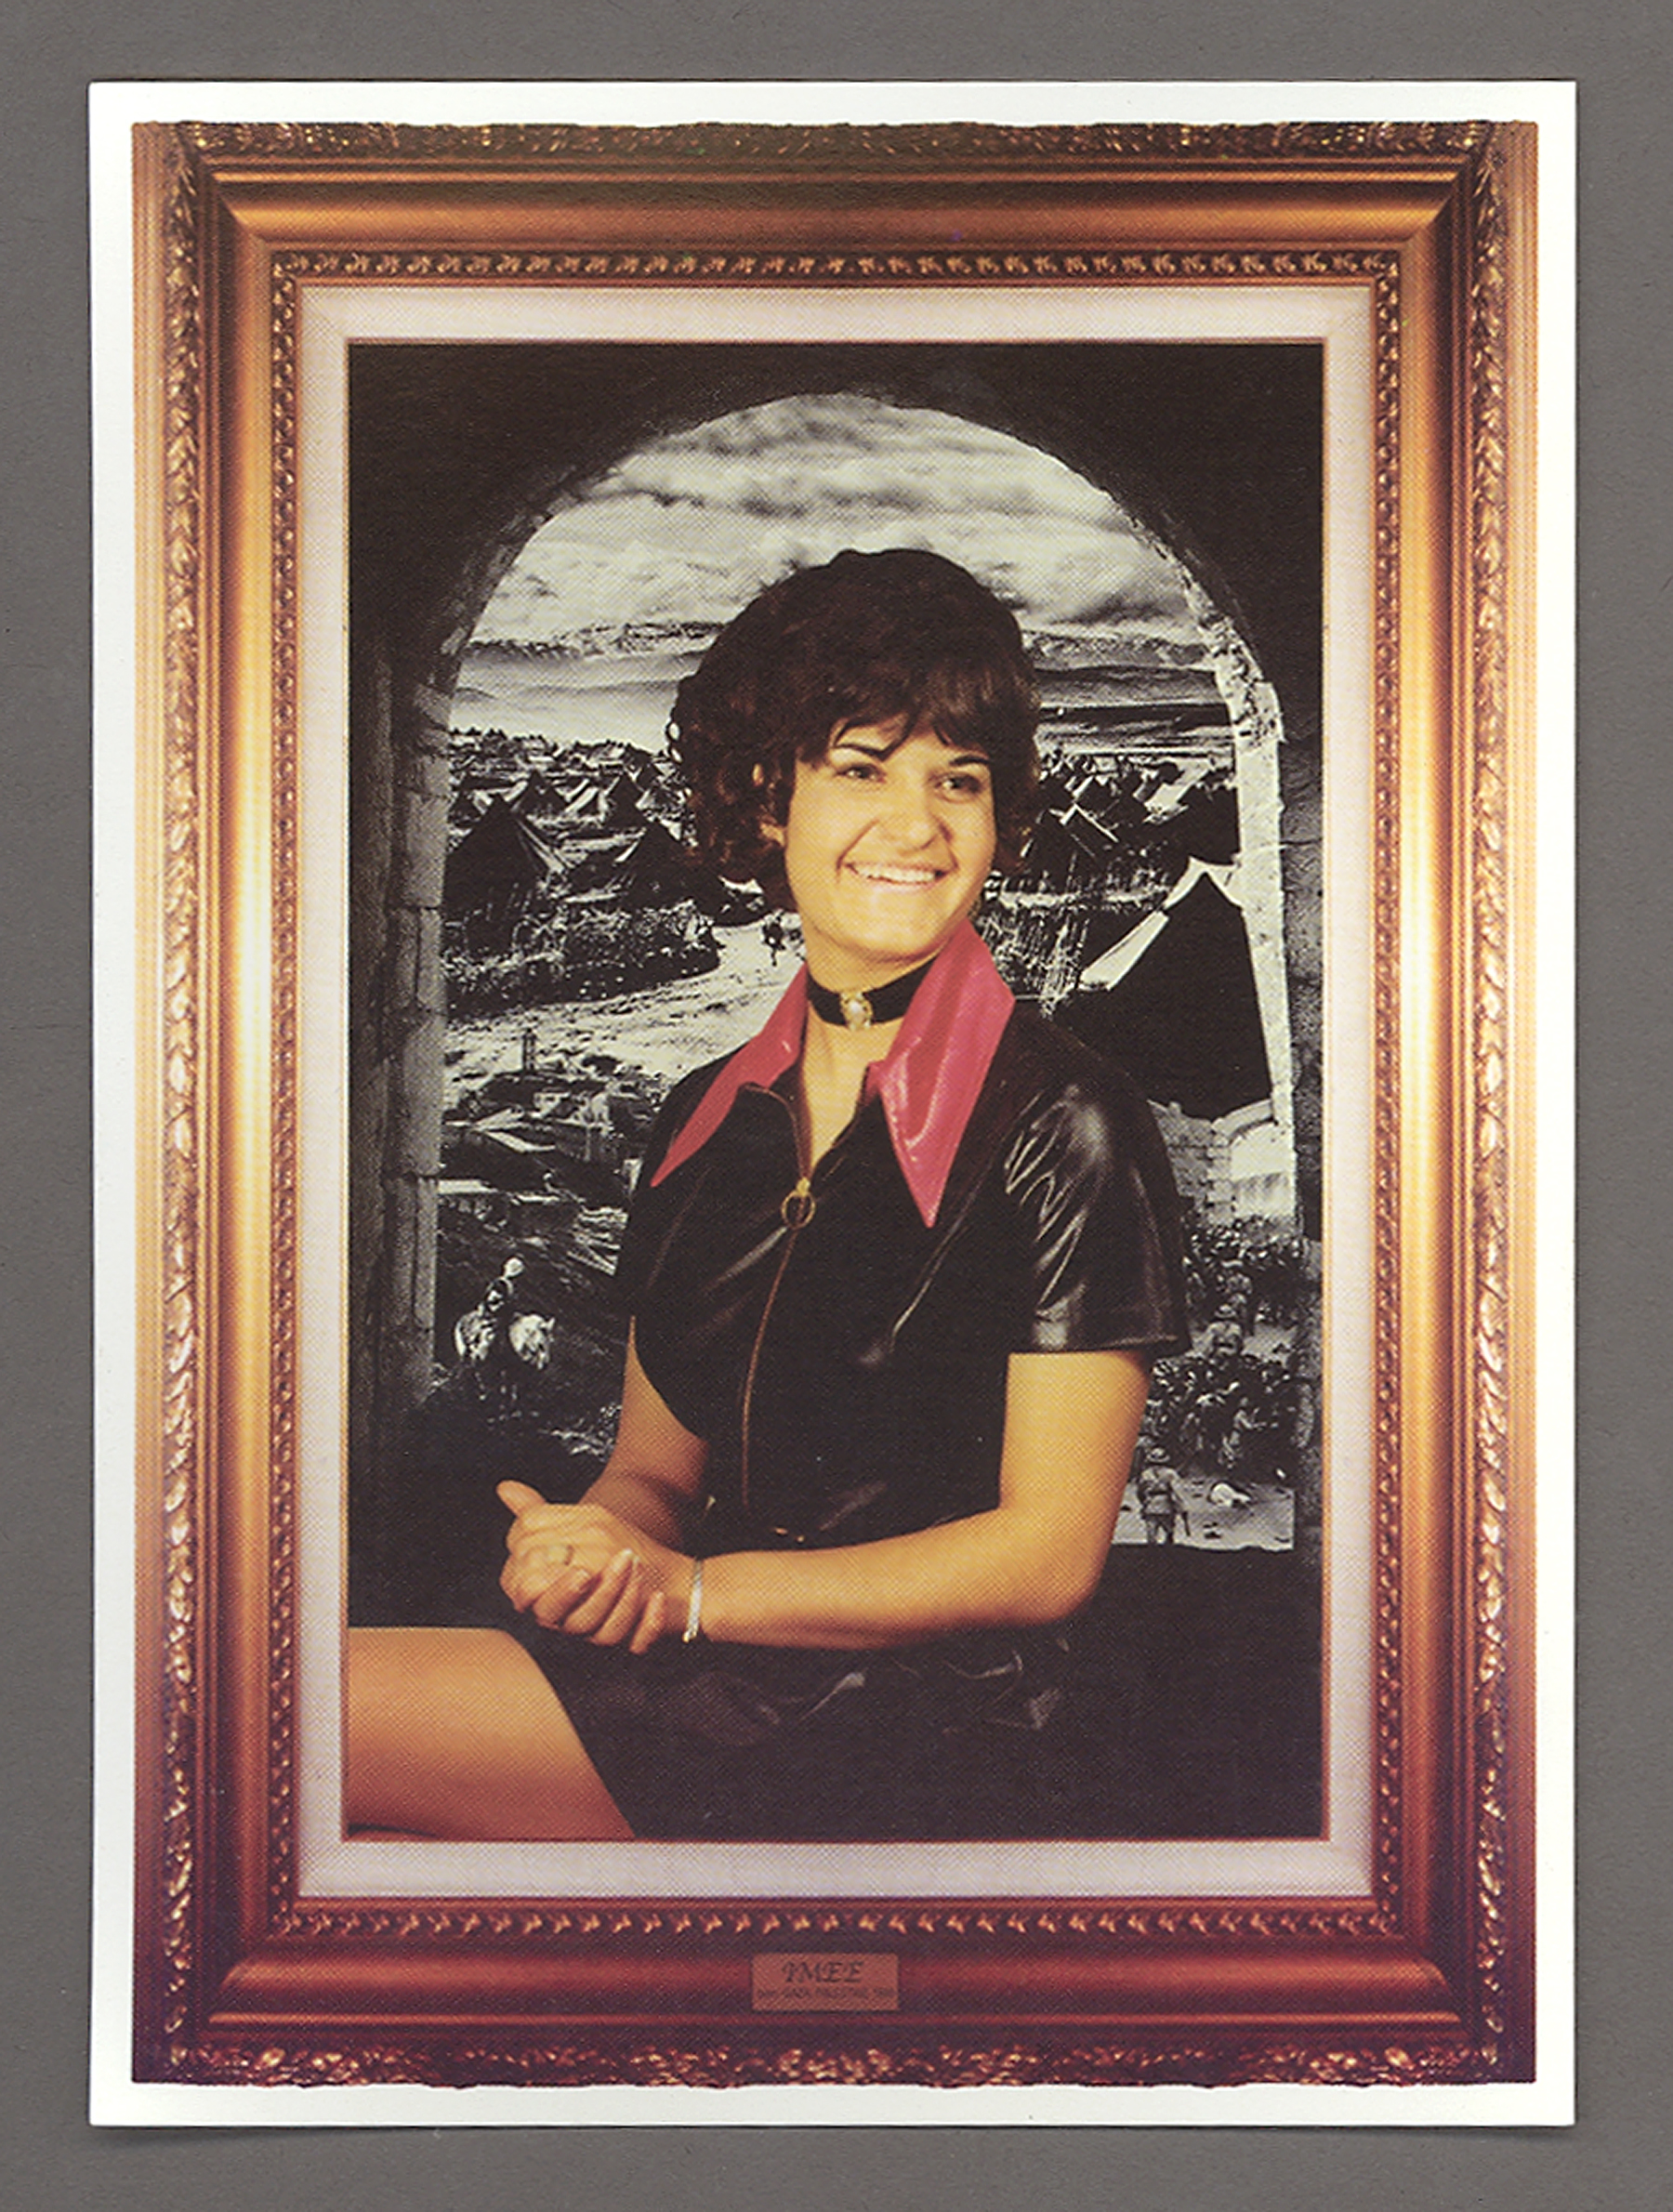 postcard with a portrait of a smiling woman with short black hair